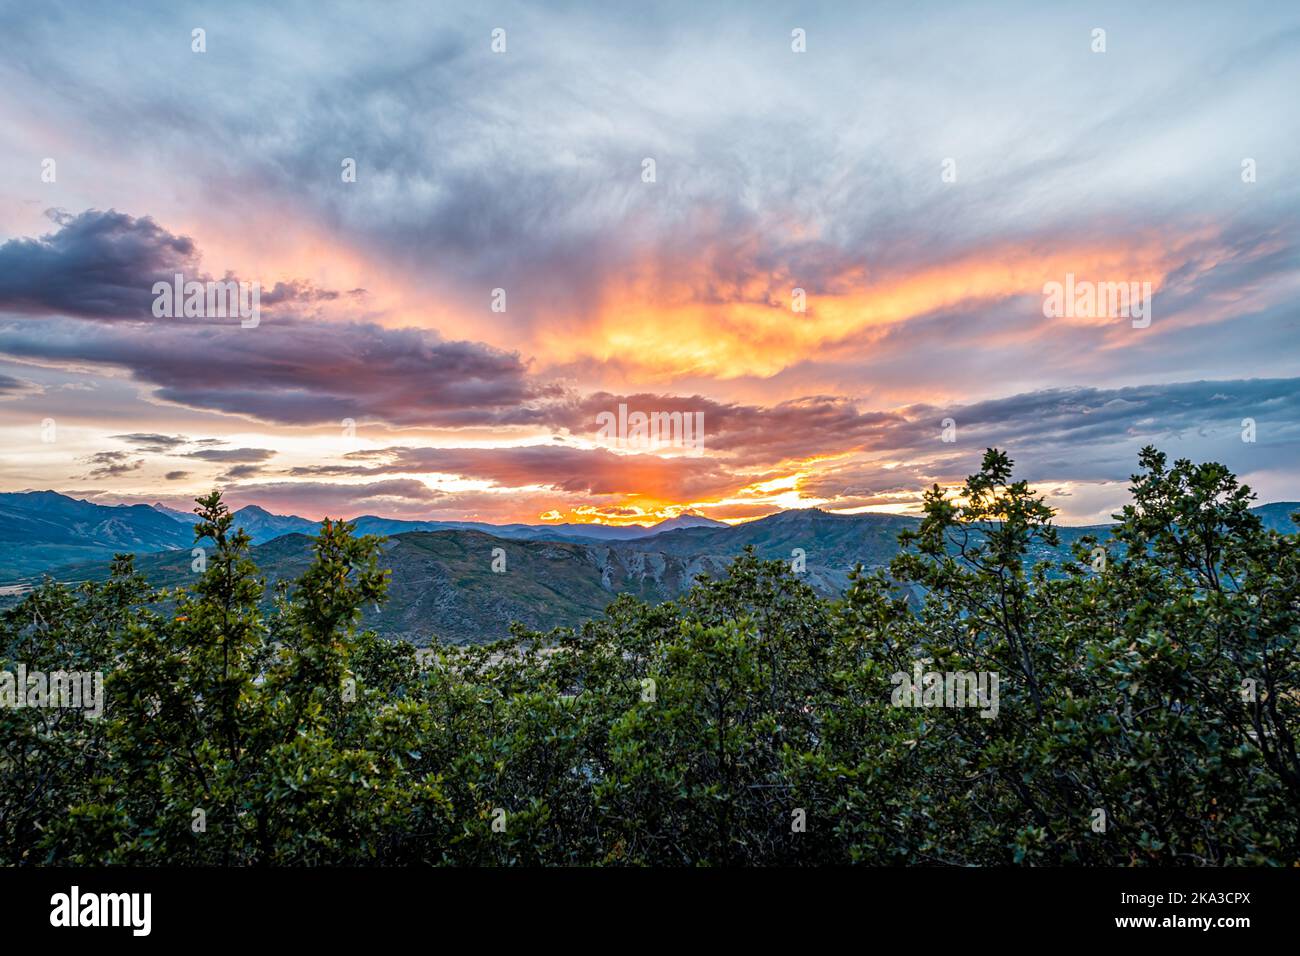 Aspen, Colorado Rocky mountains colorful sunset orange yellow light in sky wide angle view of blue skyscape, storm clouds foreground of oak trees Stock Photo